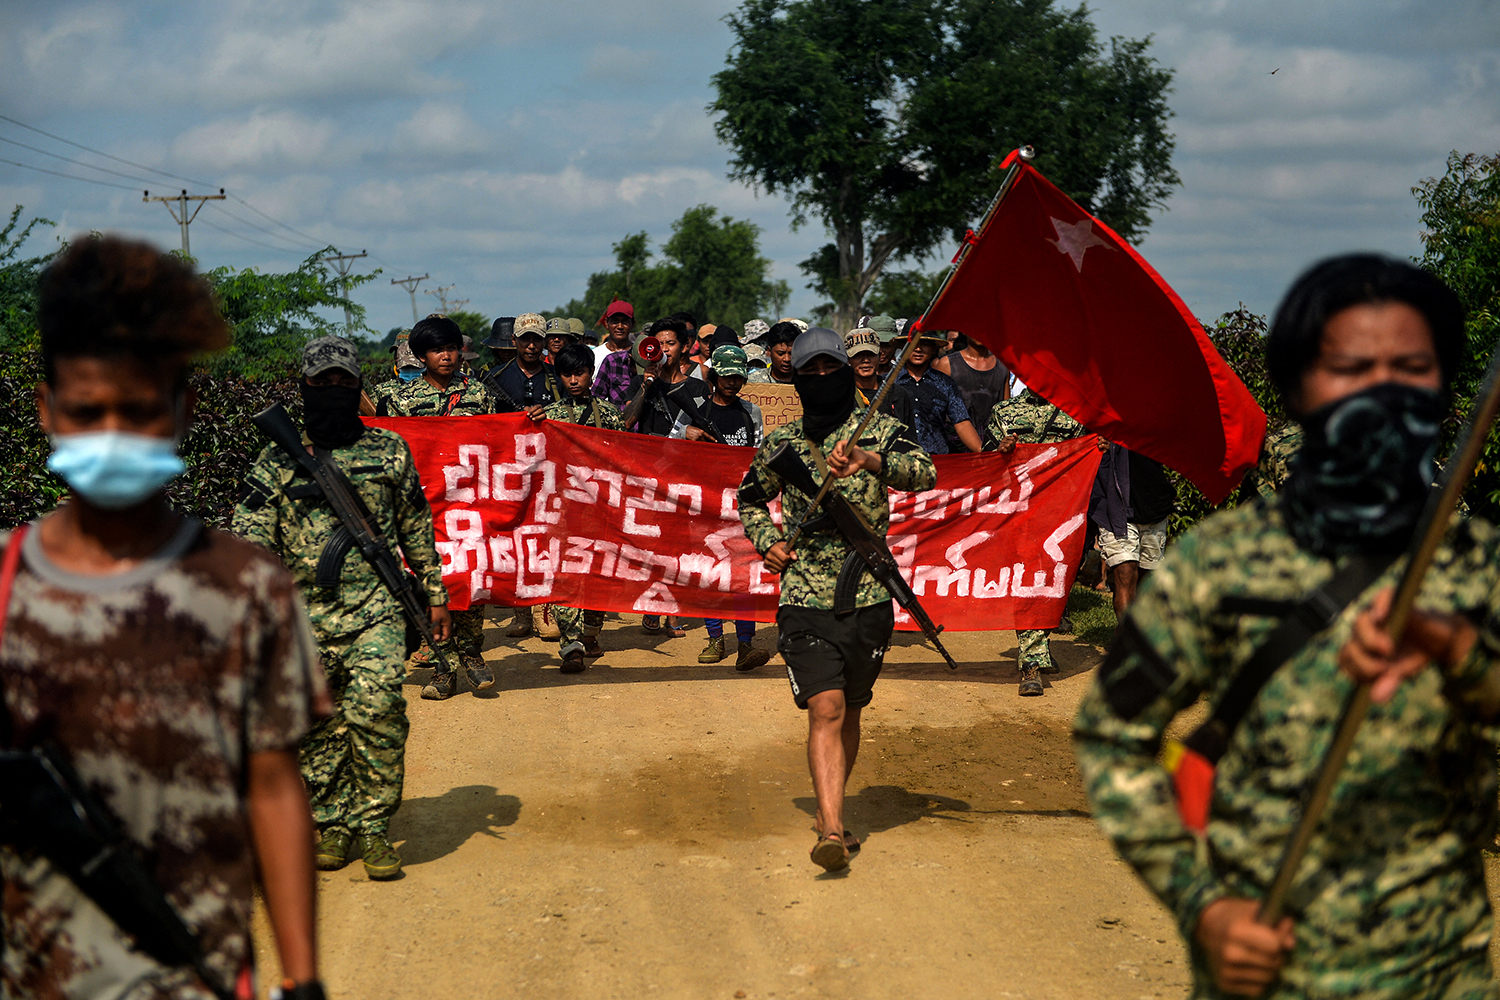 Anti-coup fighters escort protesters as they take part in a demonstration against the military coup in Sagaing Region on September 7, 2022. (AFP)